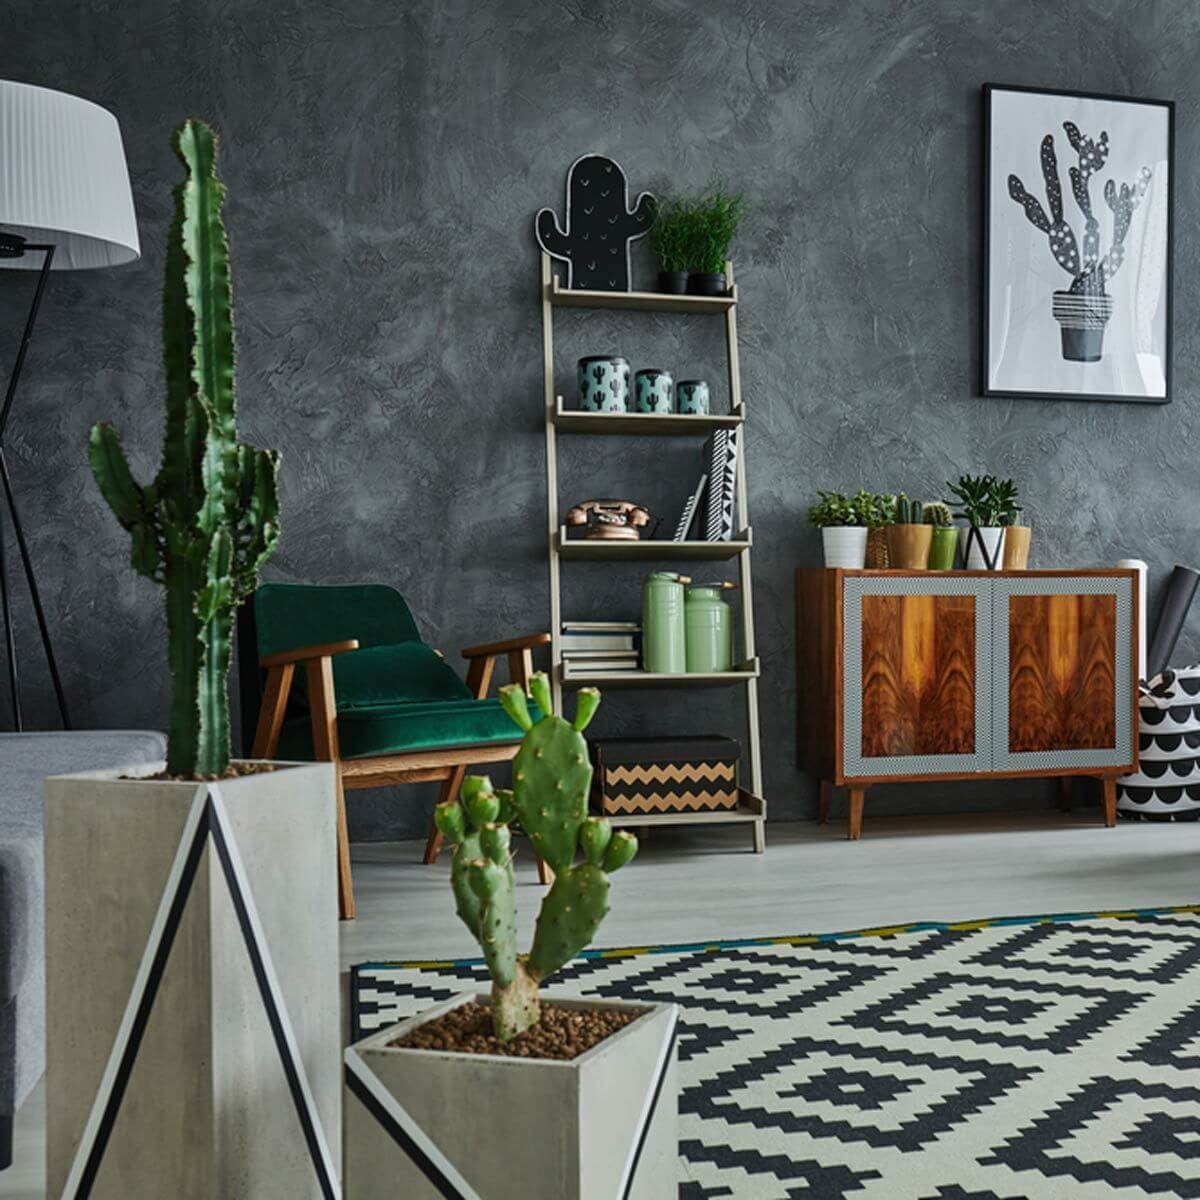 14 Ways to Decorate Your Home with Cactus | The Family ...